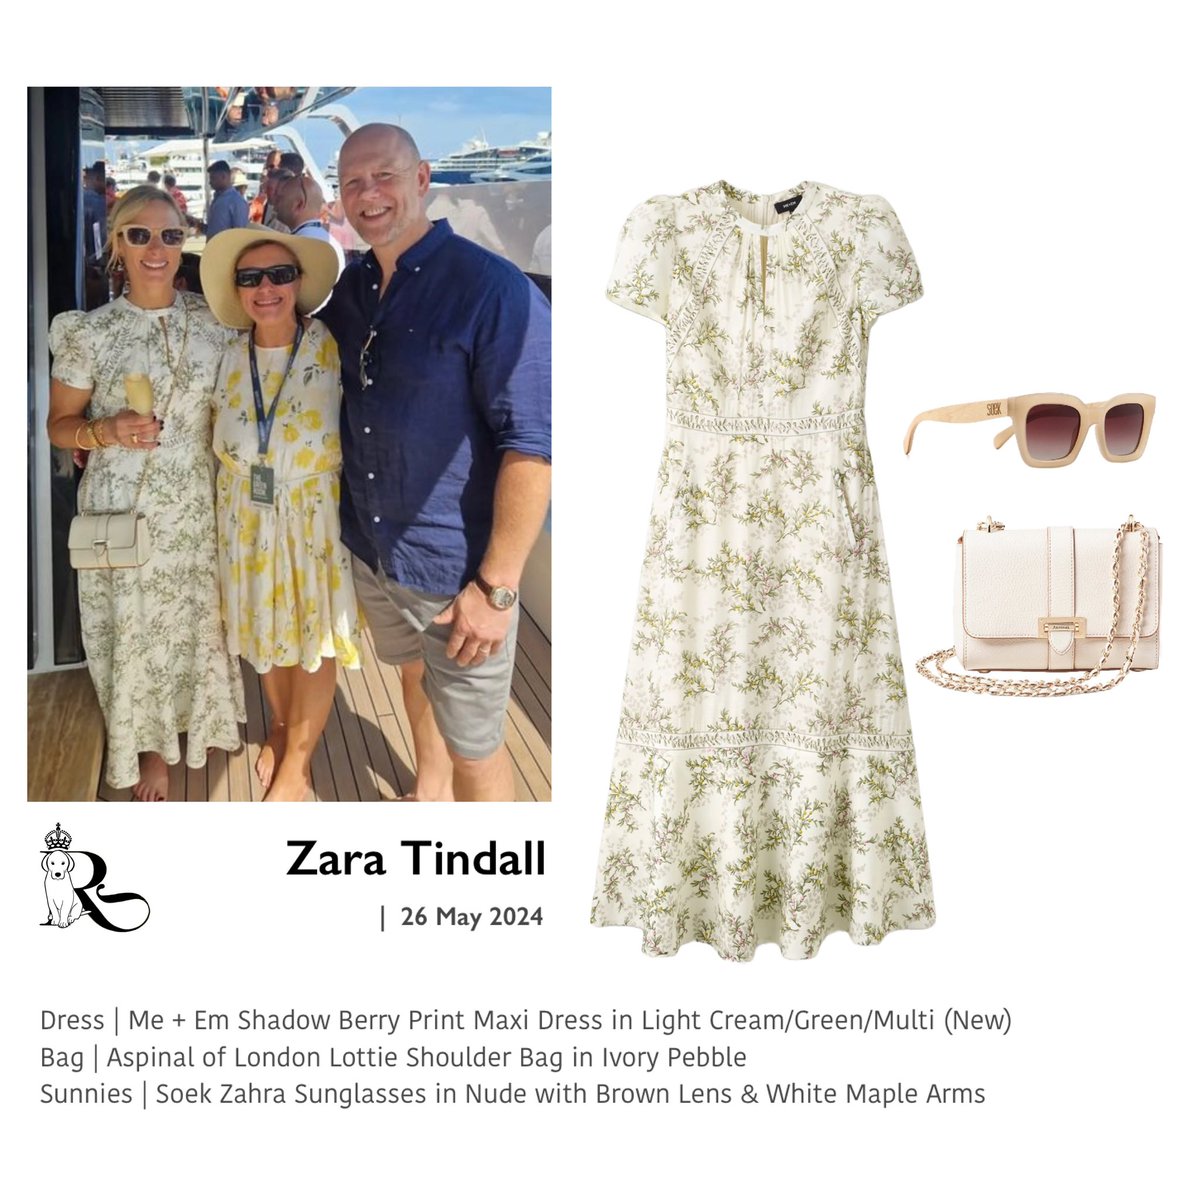 Zara and Mike Tindall attended the F1 Monaco Grand Prix this weekend. Photos are limited as of now, but it appears that they were guests of The Green Room, for their yacht viewing party. Zara’s outfit details are below. #zaraTindall